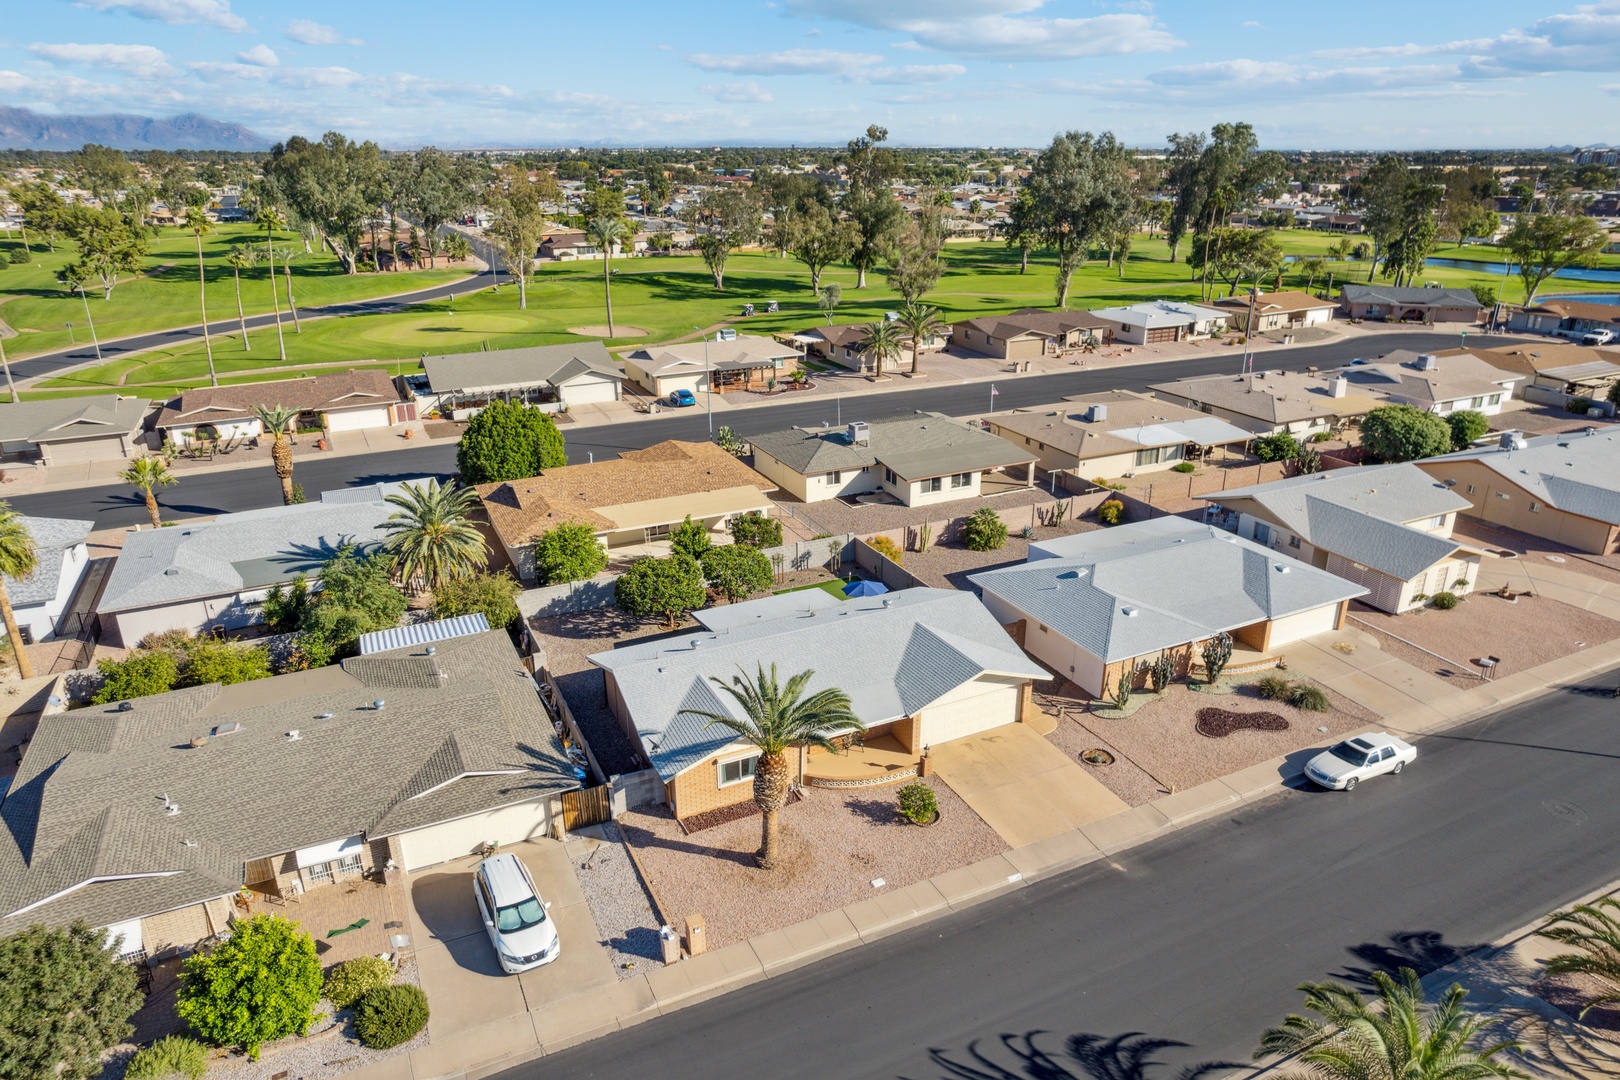 Mesa Vacation Rentals, Private Putting Oasis - this property has access to all of the amazing amenities Sunland Village offers its guests. Enjoy three swimming pools, a Jacuzzi, a whirlpool, tennis courts, pickleball courts, a golf course, and so much more during your stay!